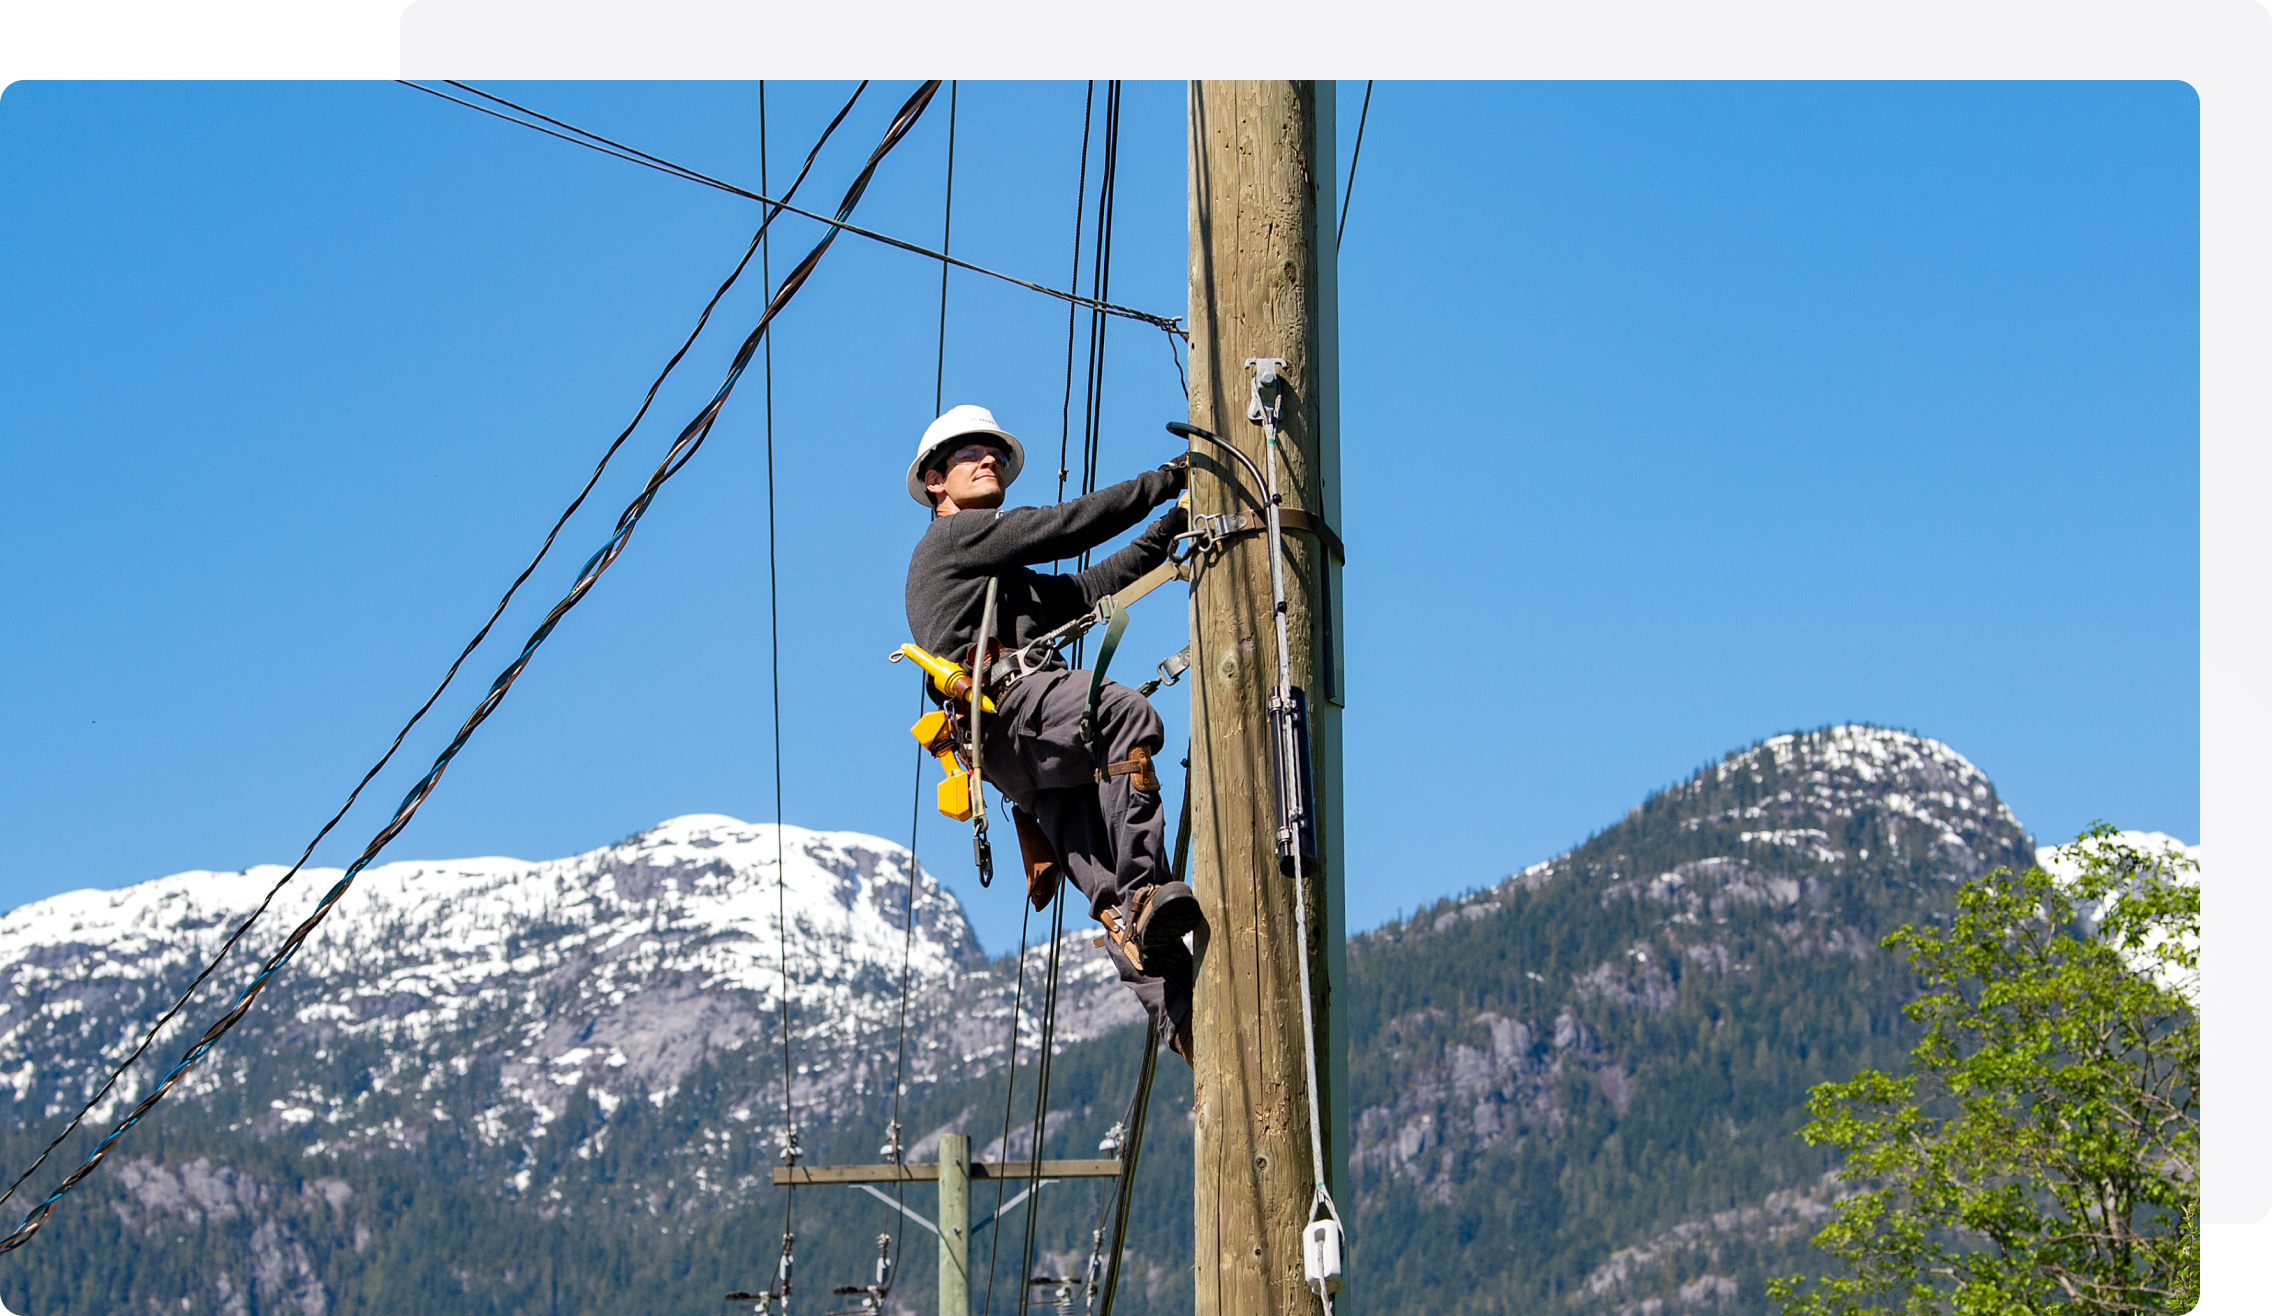 A worker scaling a hydro pole with mountains in the background